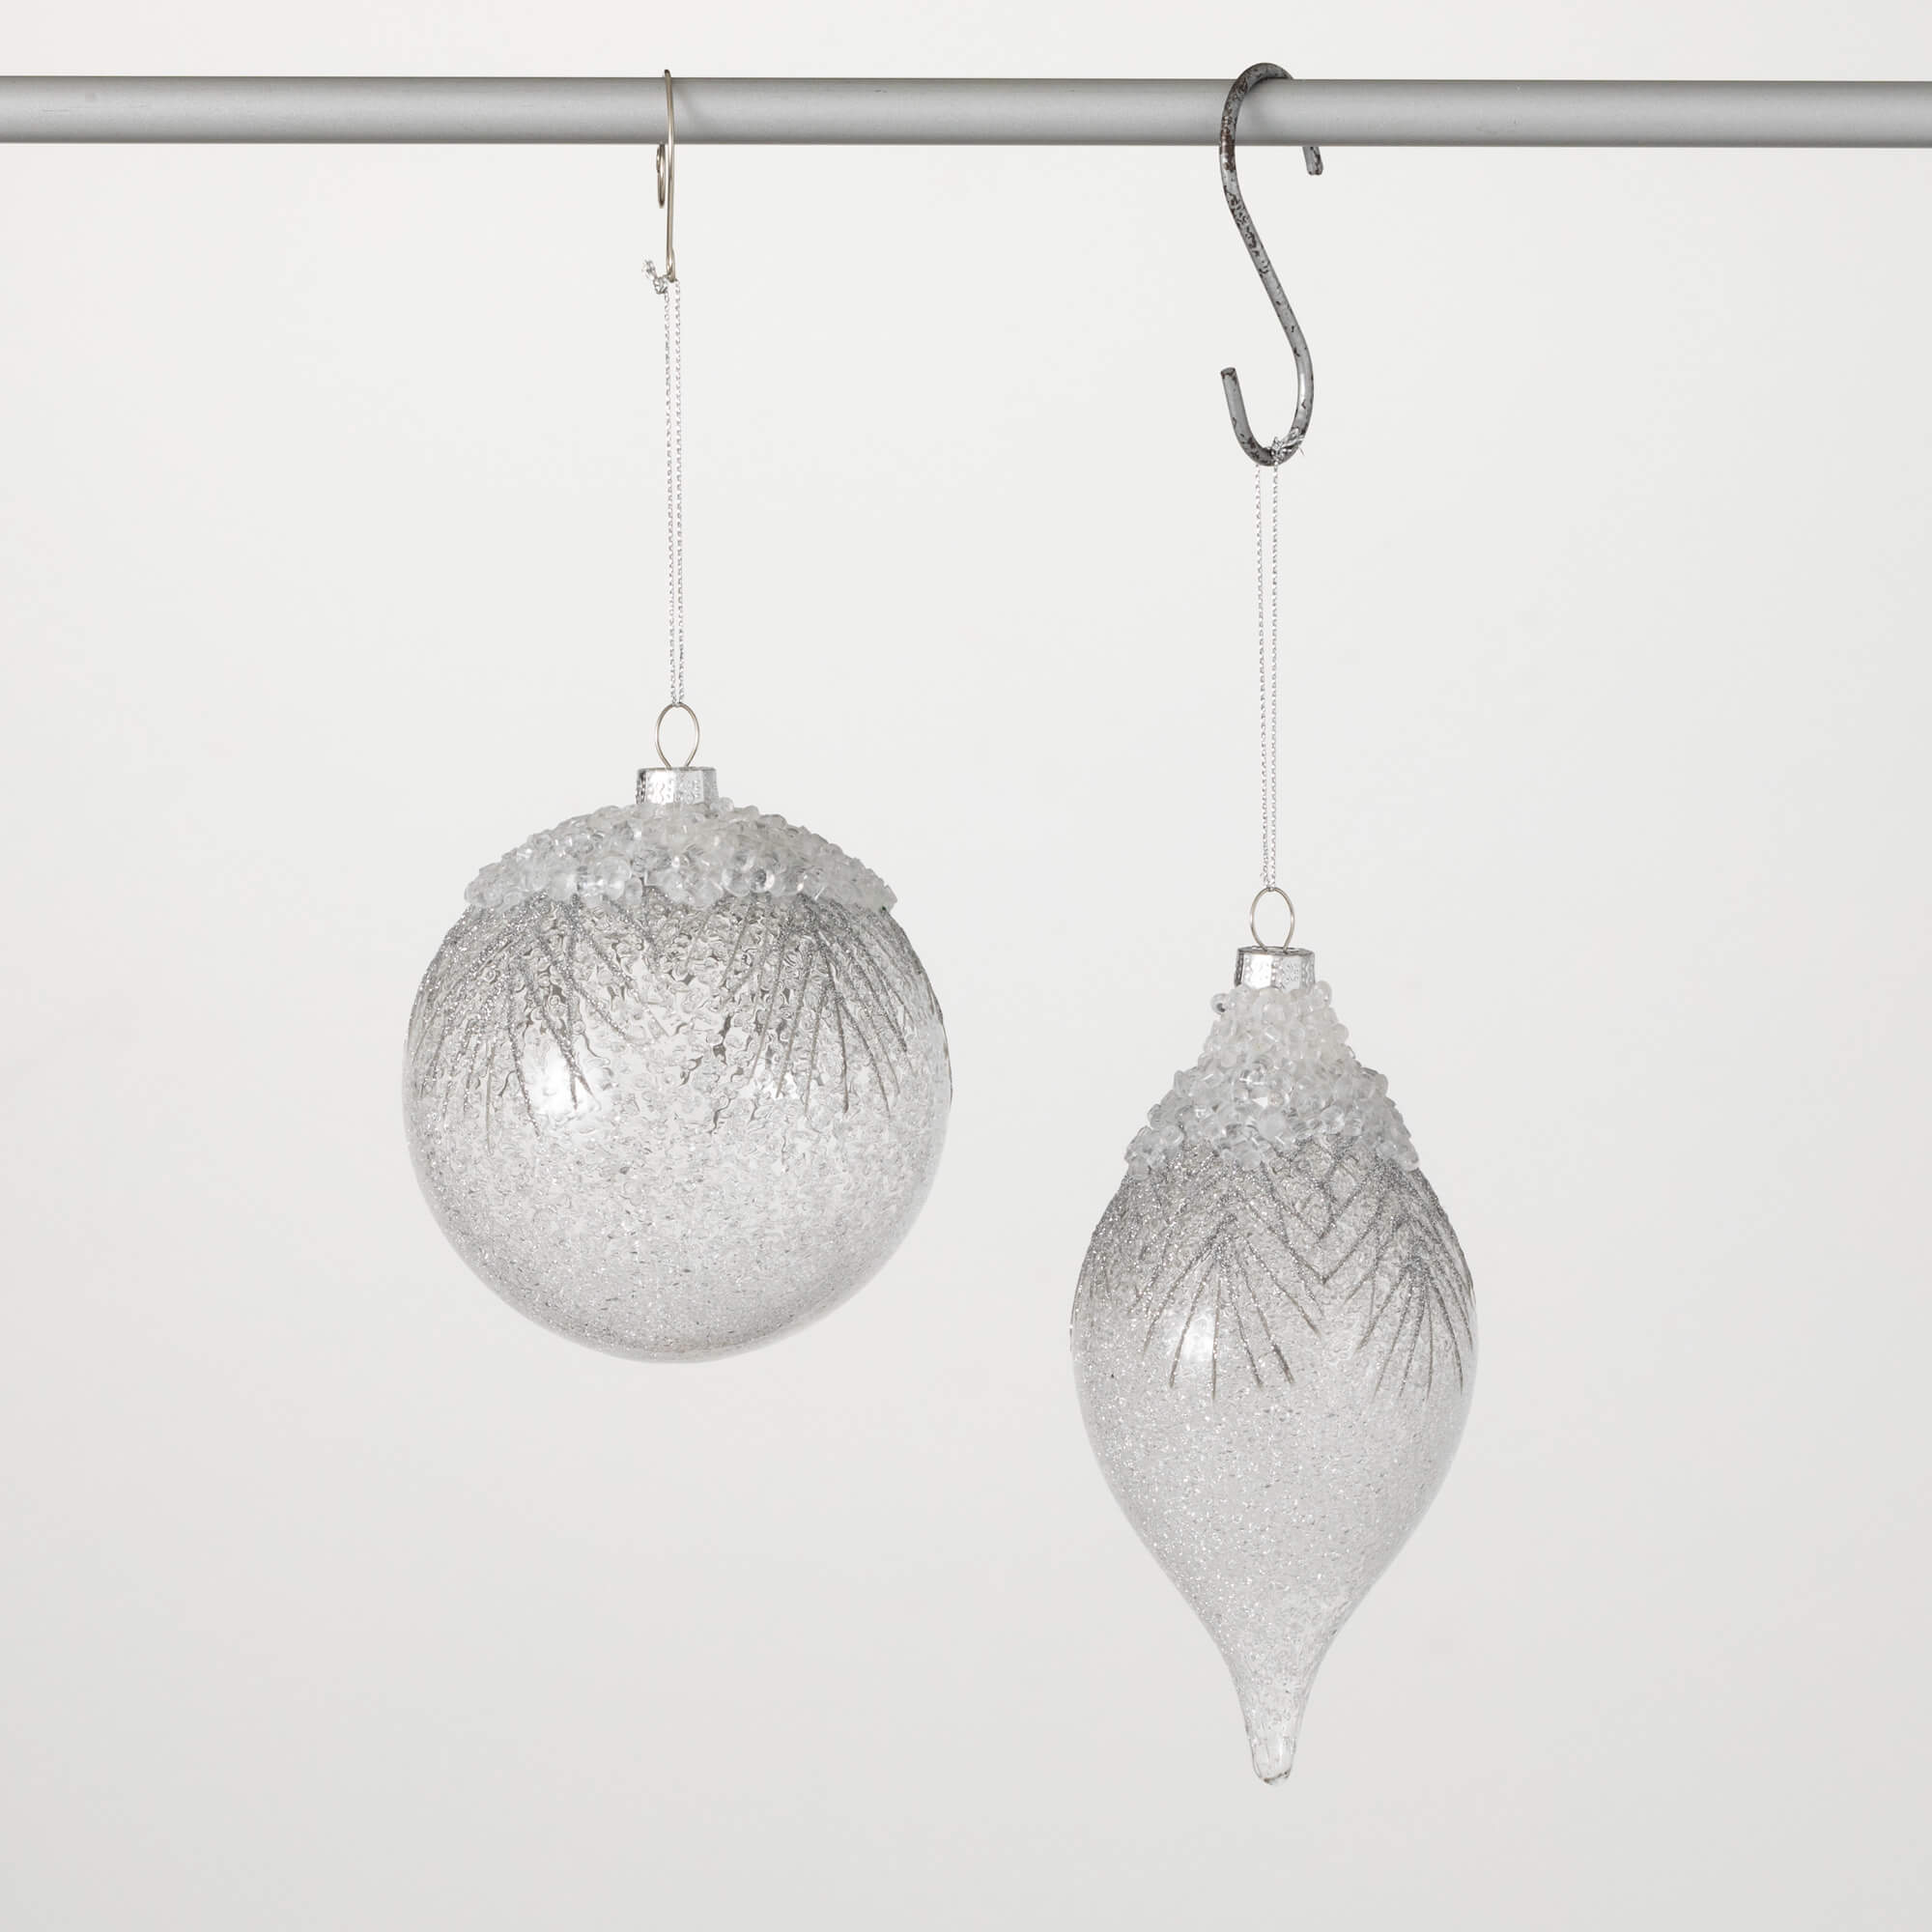 FROSTED SILVER CLEAR ORNAMENTS